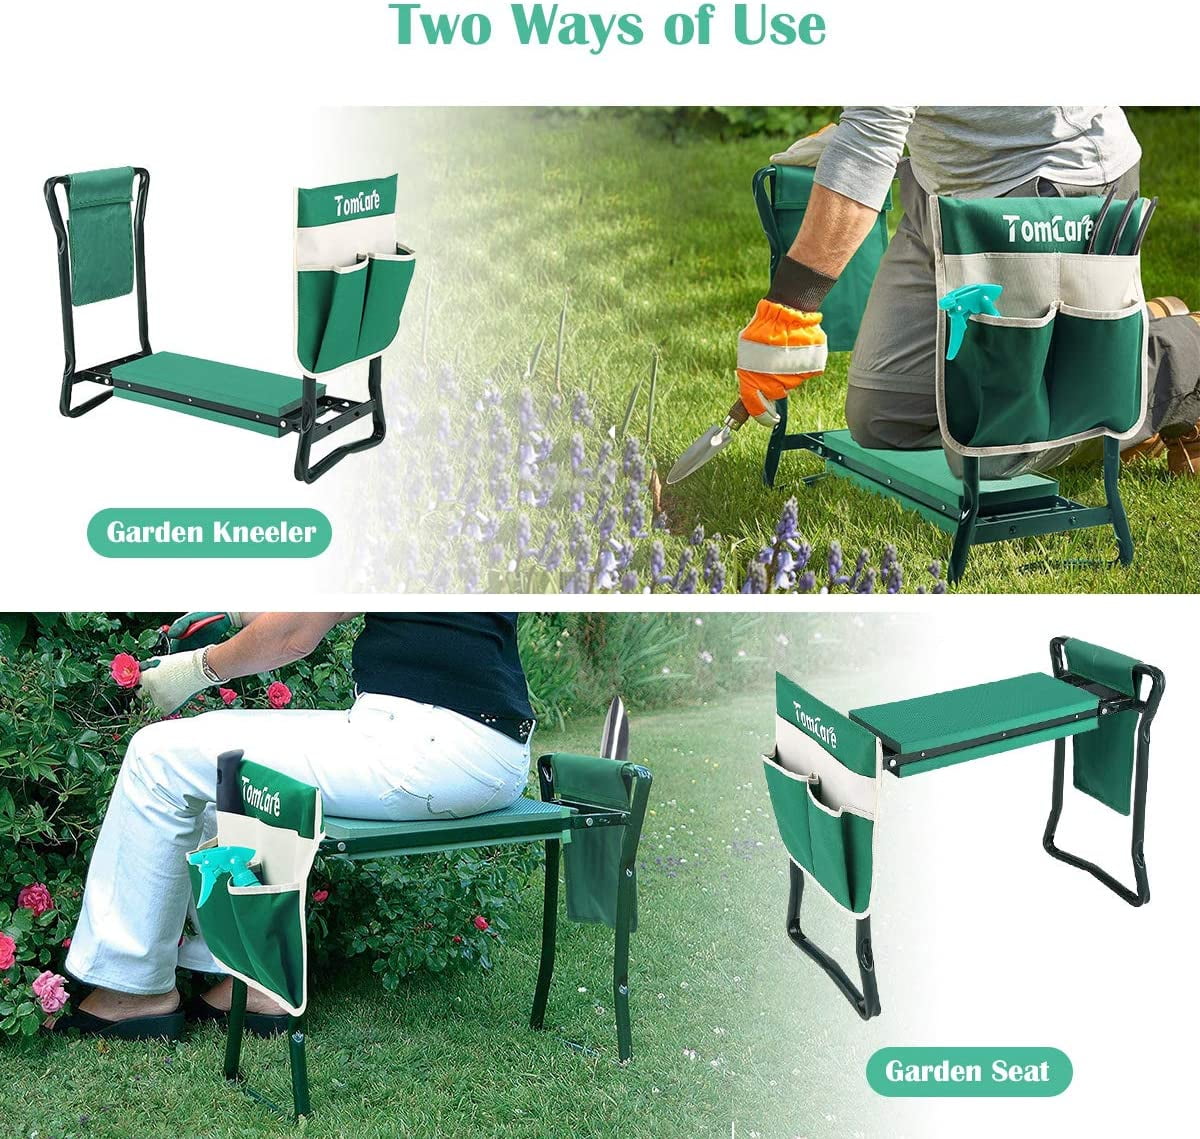 Green Garden Foldable Kneeler/Kneeling Bench Stool Cushion Seat Pad Tools Pouch 